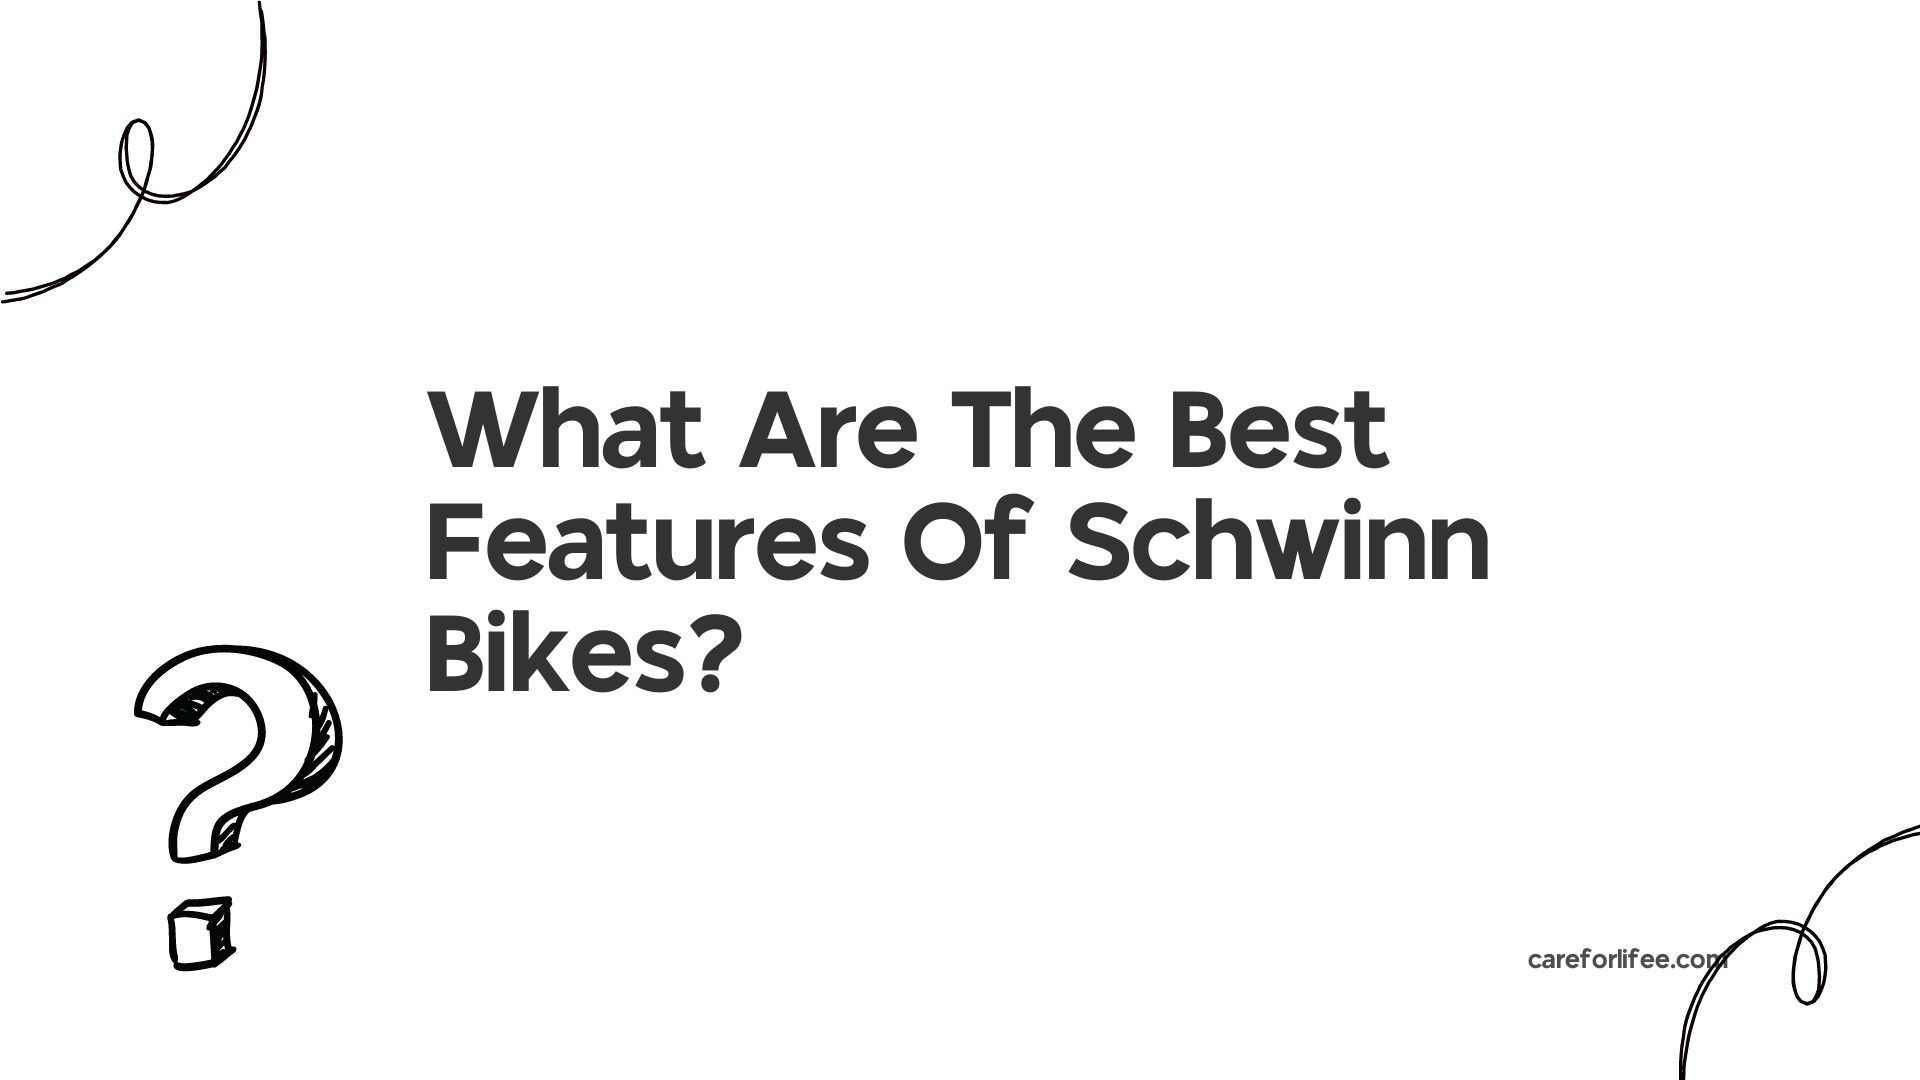 What Are The Best Features Of Schwinn Bikes?